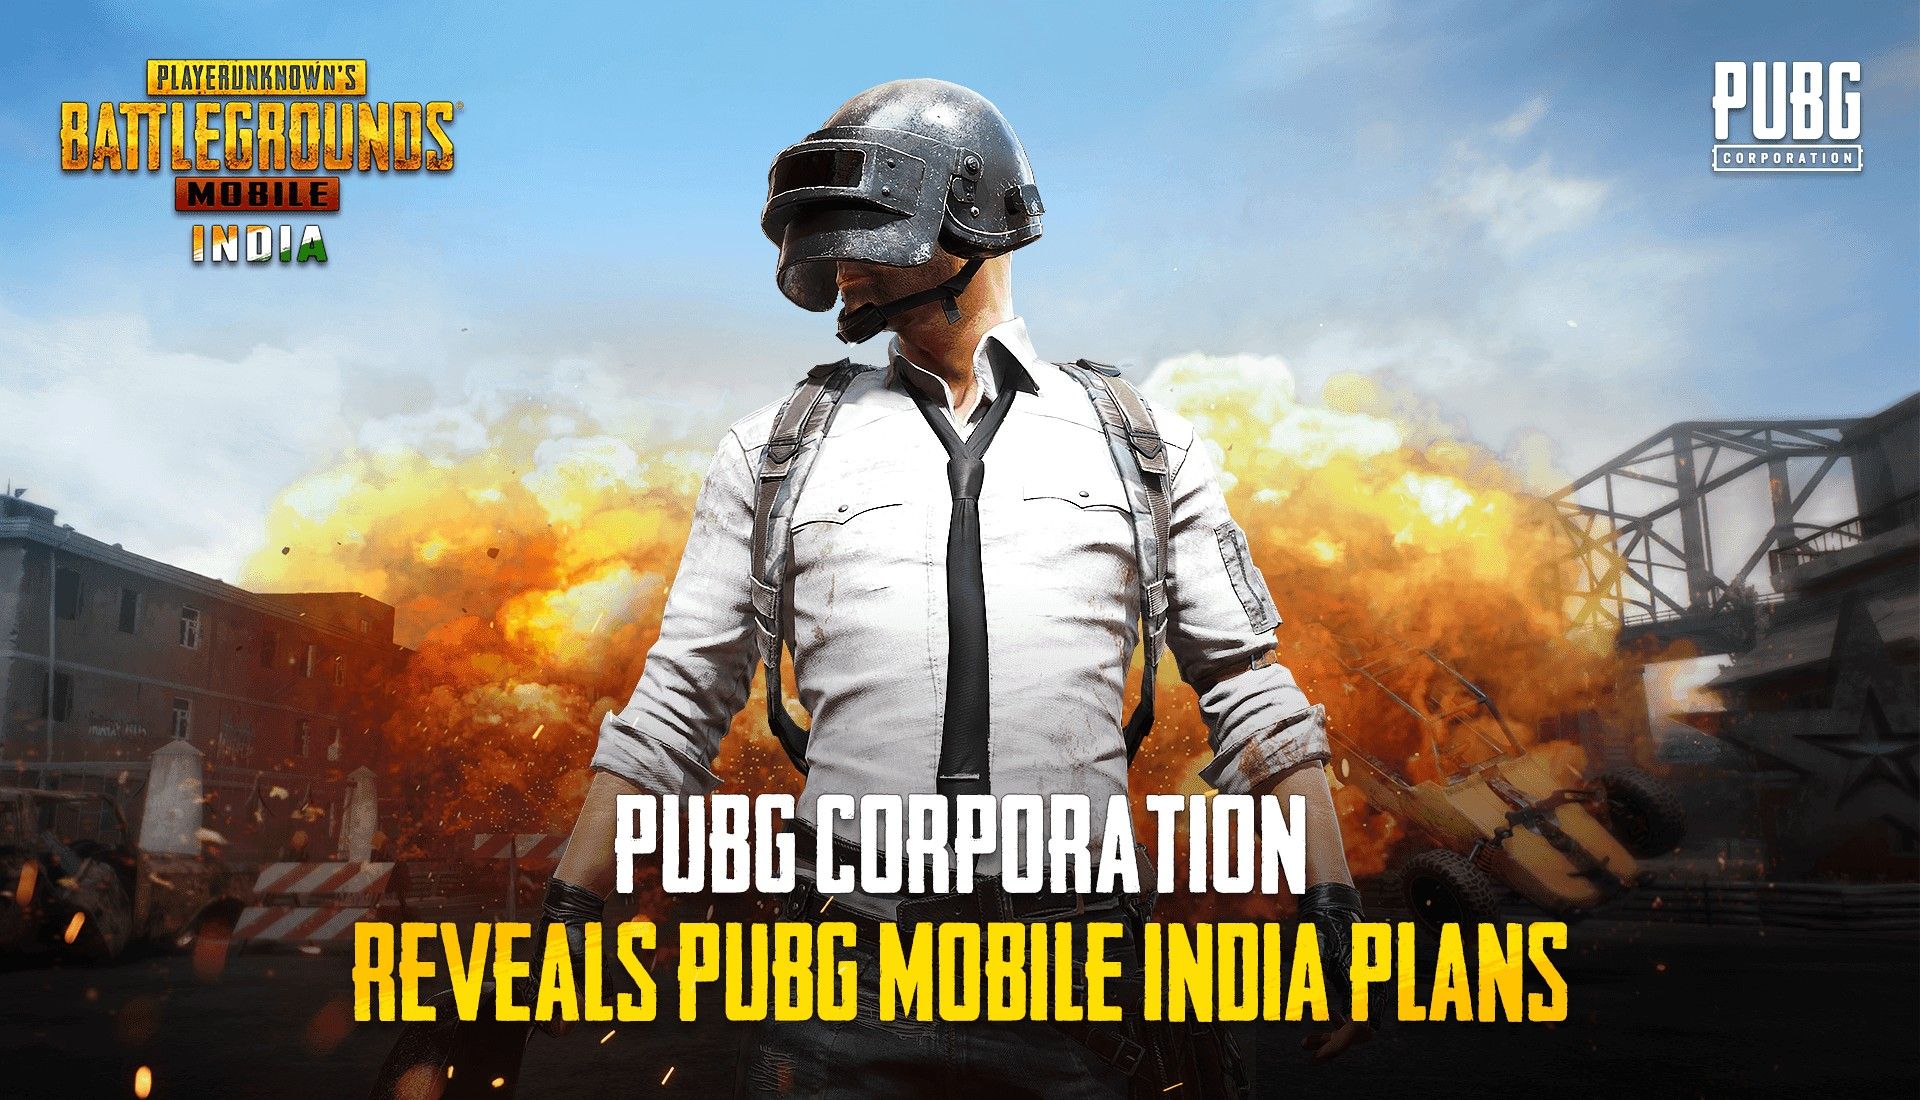 playerunknowns battlegrounds pubg mobile india reveal